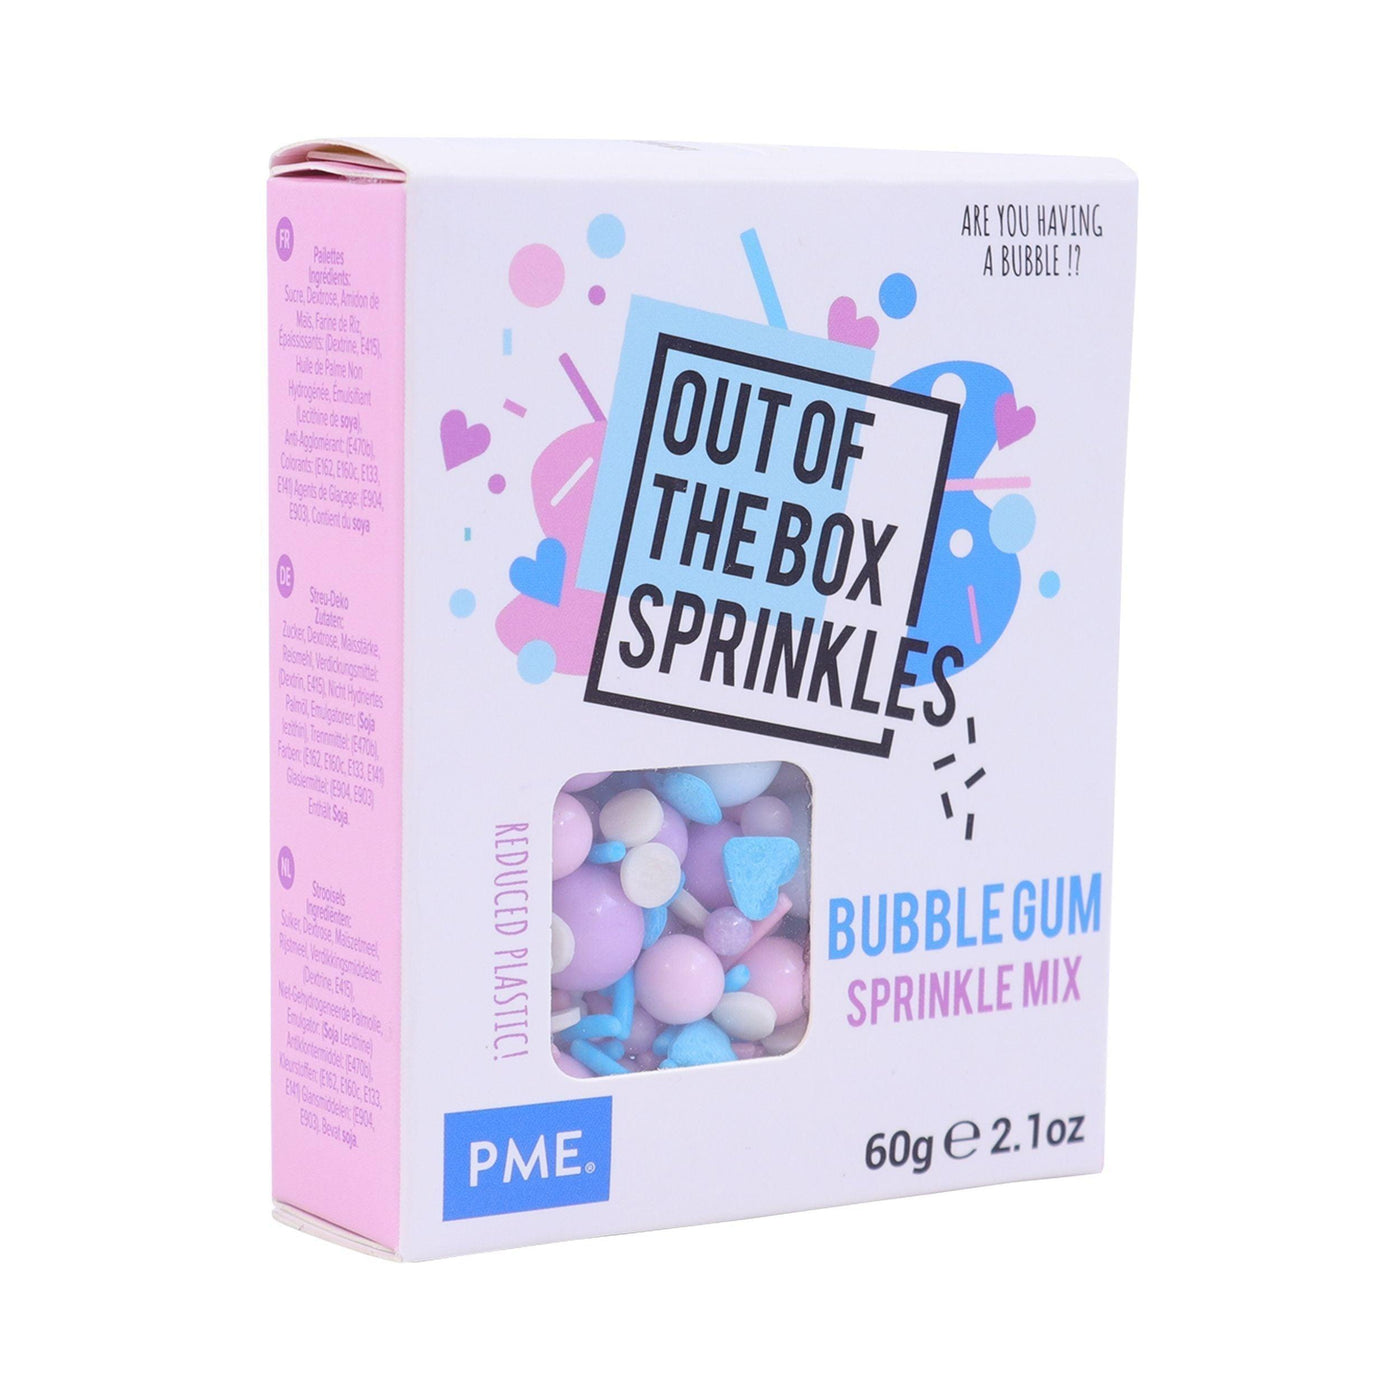 Out of the Box Sprinkles - Bubble Gum 60g - Patissland